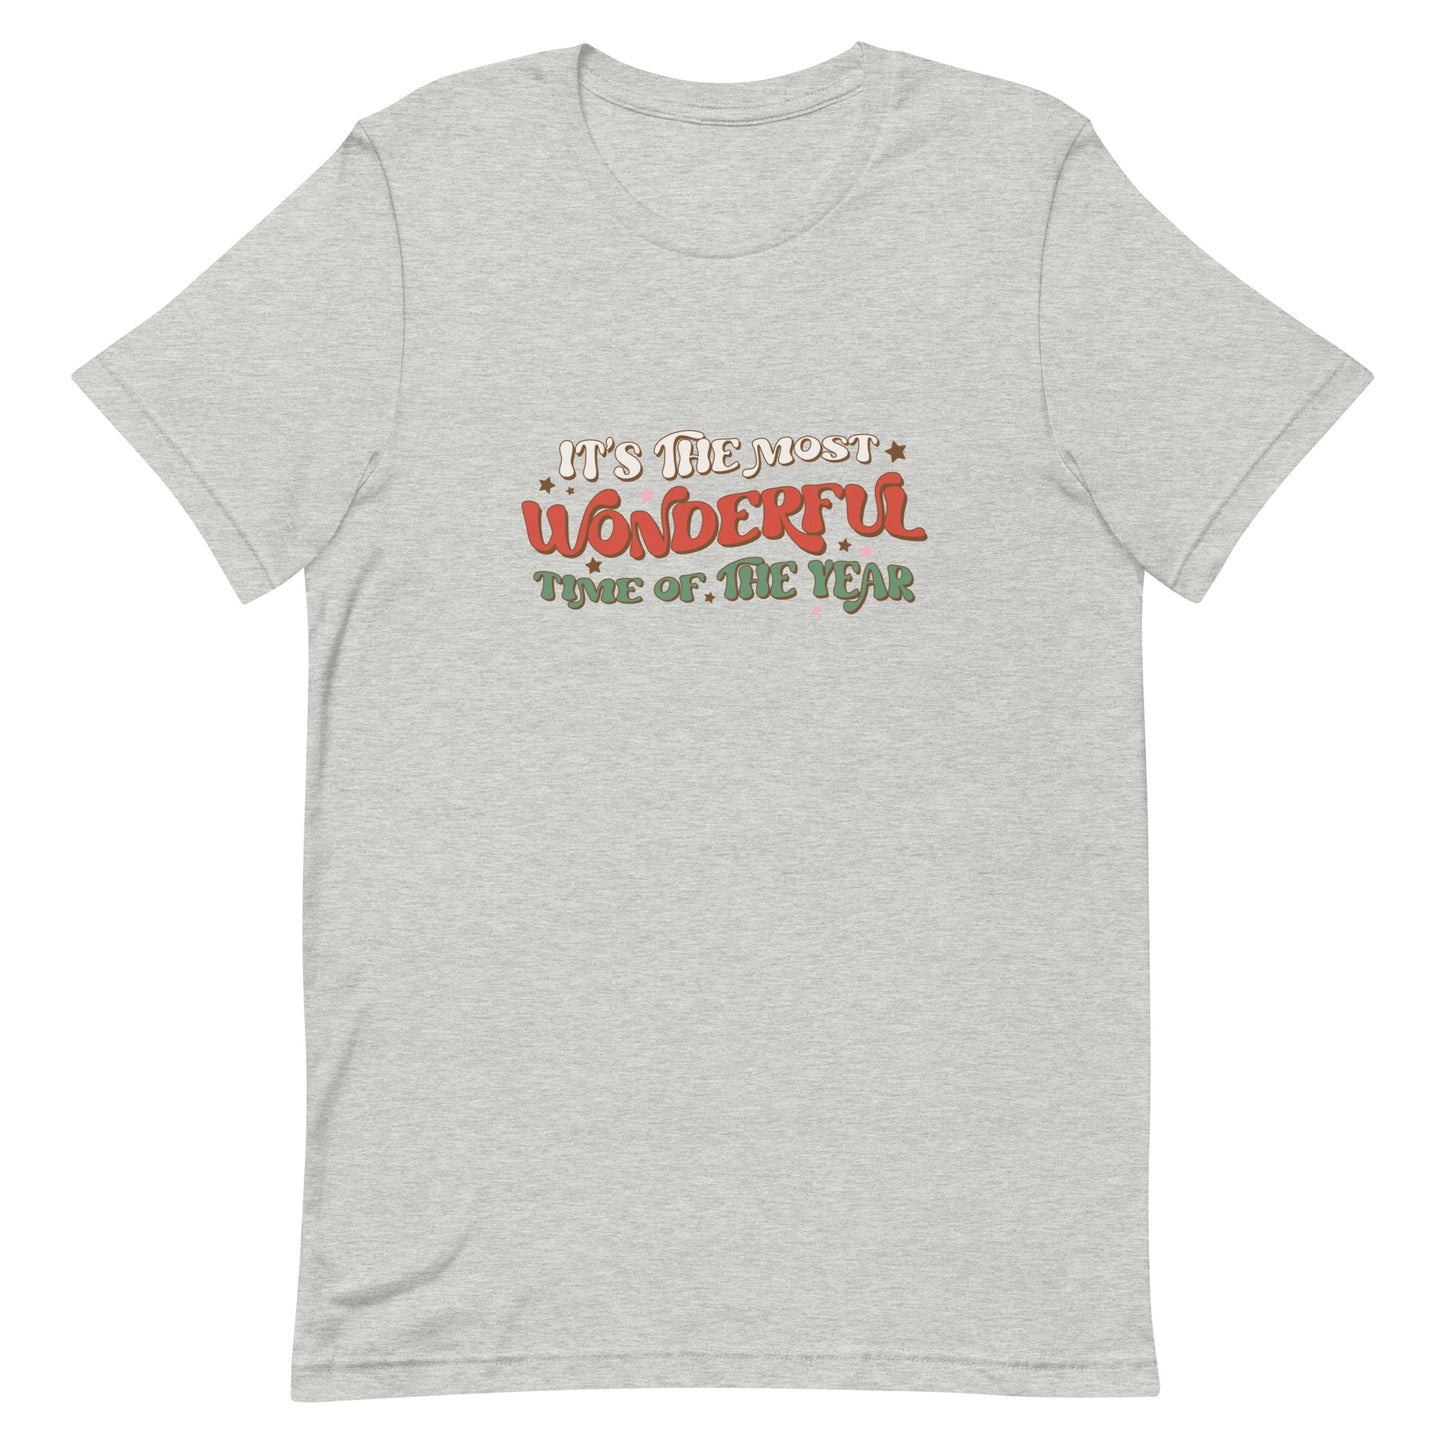 It's the Most Wonderful Time of the Year Unisex t-shirt